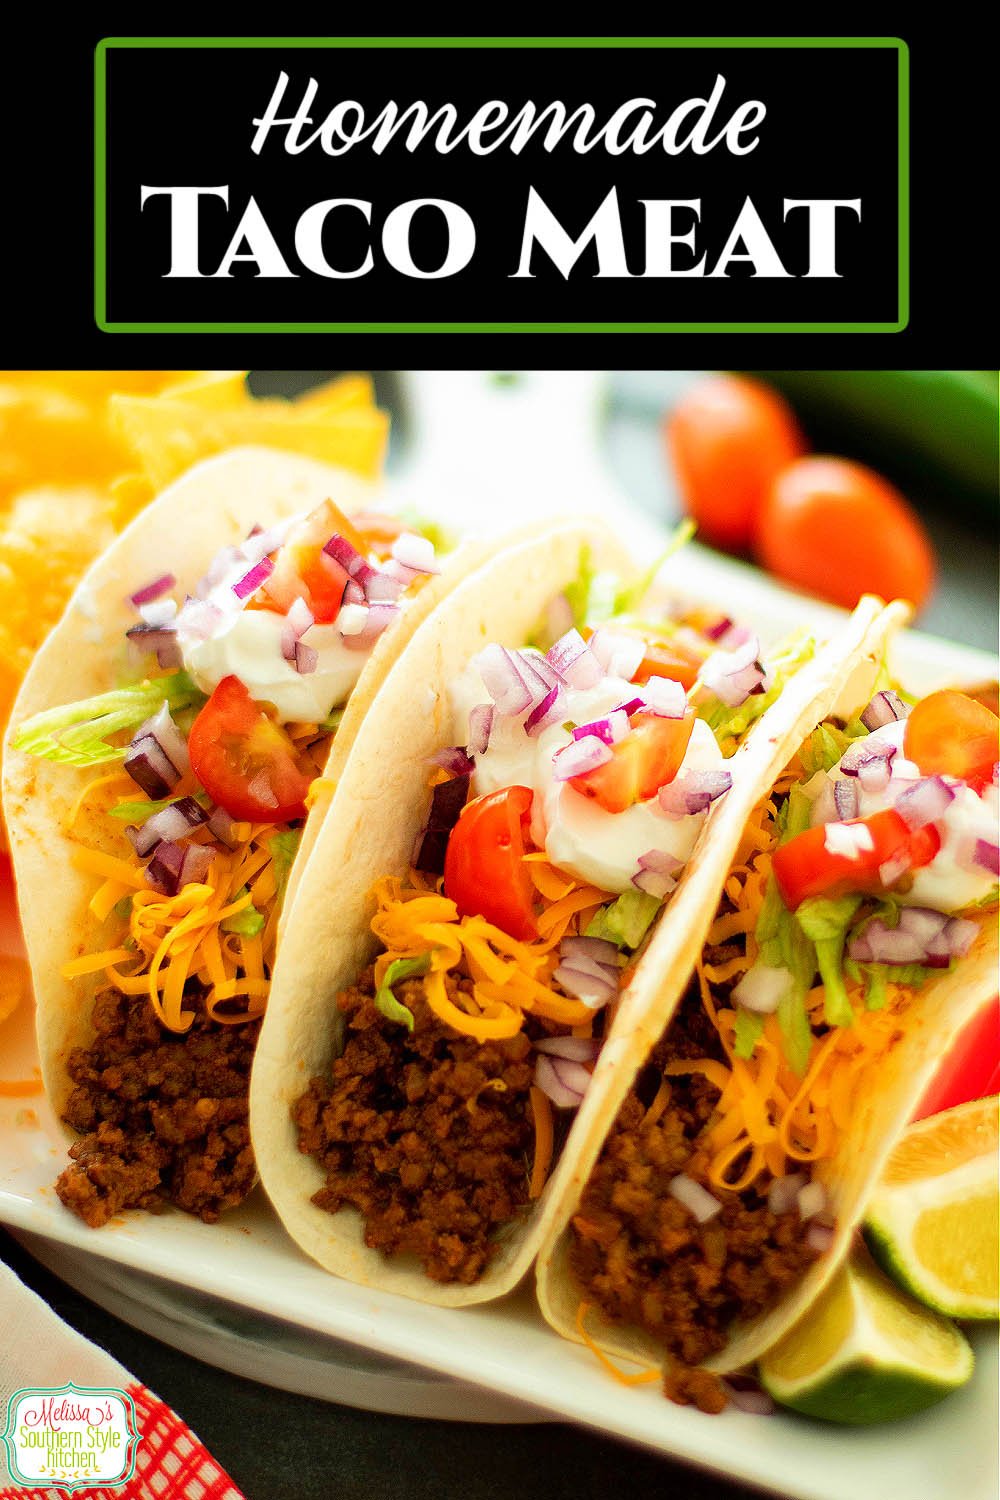 Make your own delicious Taco Meat for your next homestyle fiesta! #tacos #tacomeat #easygroundbeefrecipes #beef #mexicanfood #easyrecipes #beefrecipes via @melissasssk